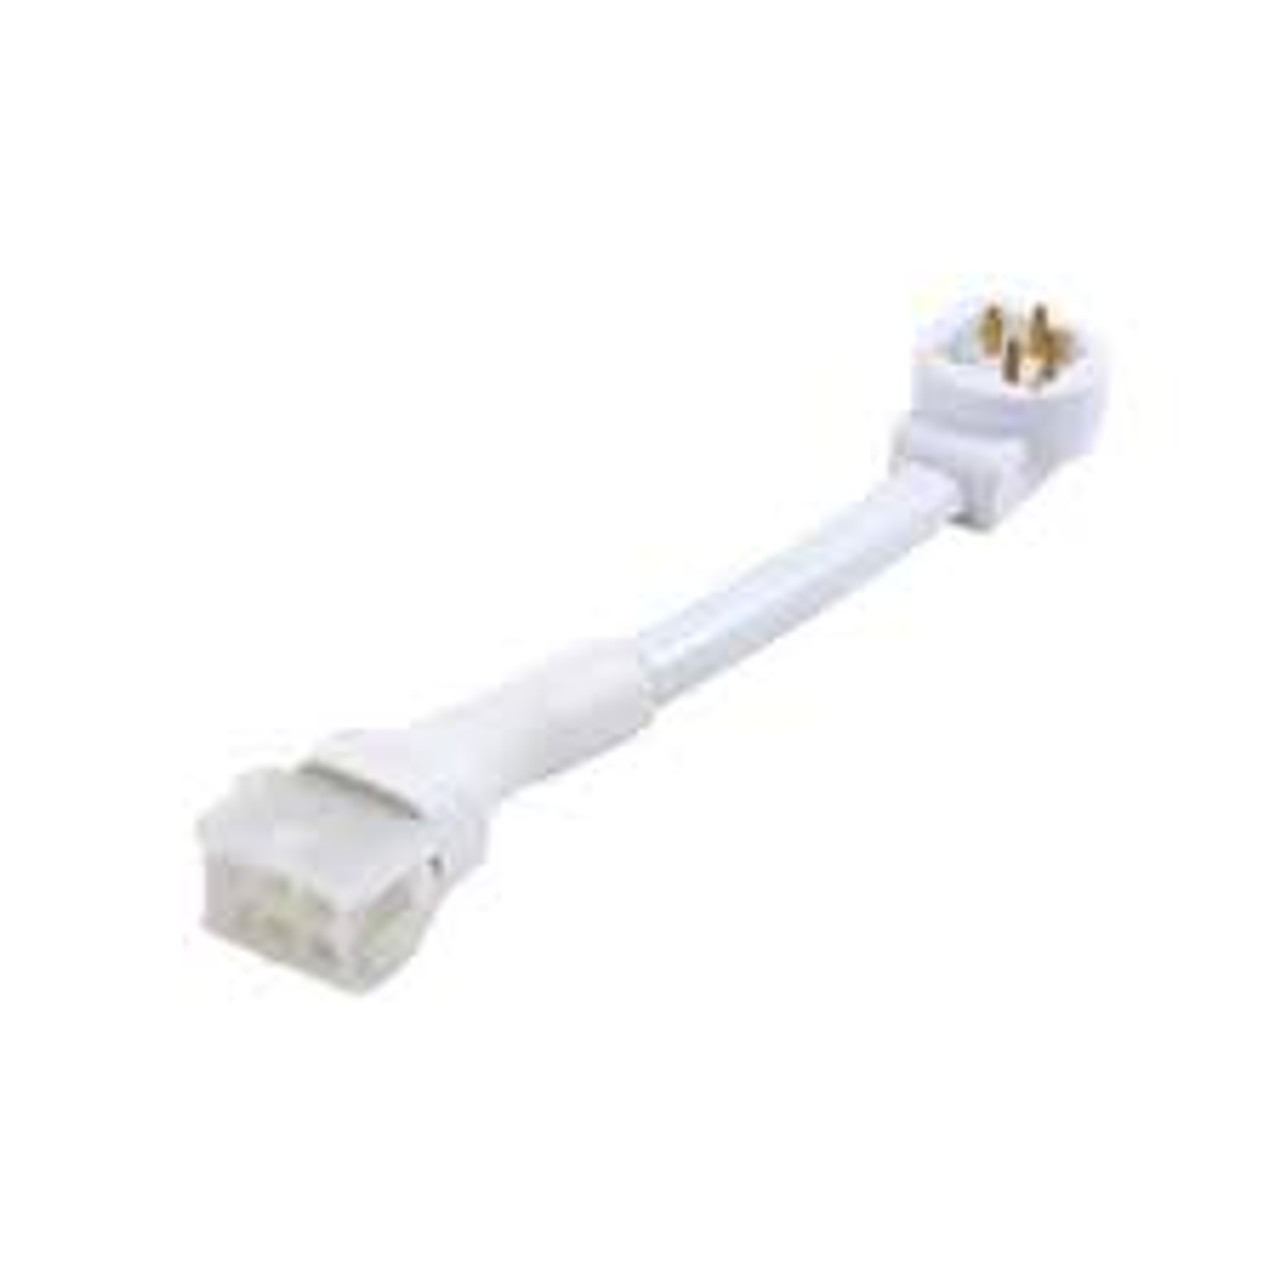 An image of a GE Appliances WR29X10049 REFRIGERATOR ADAPTER PLUG 4 TO 6 PIN